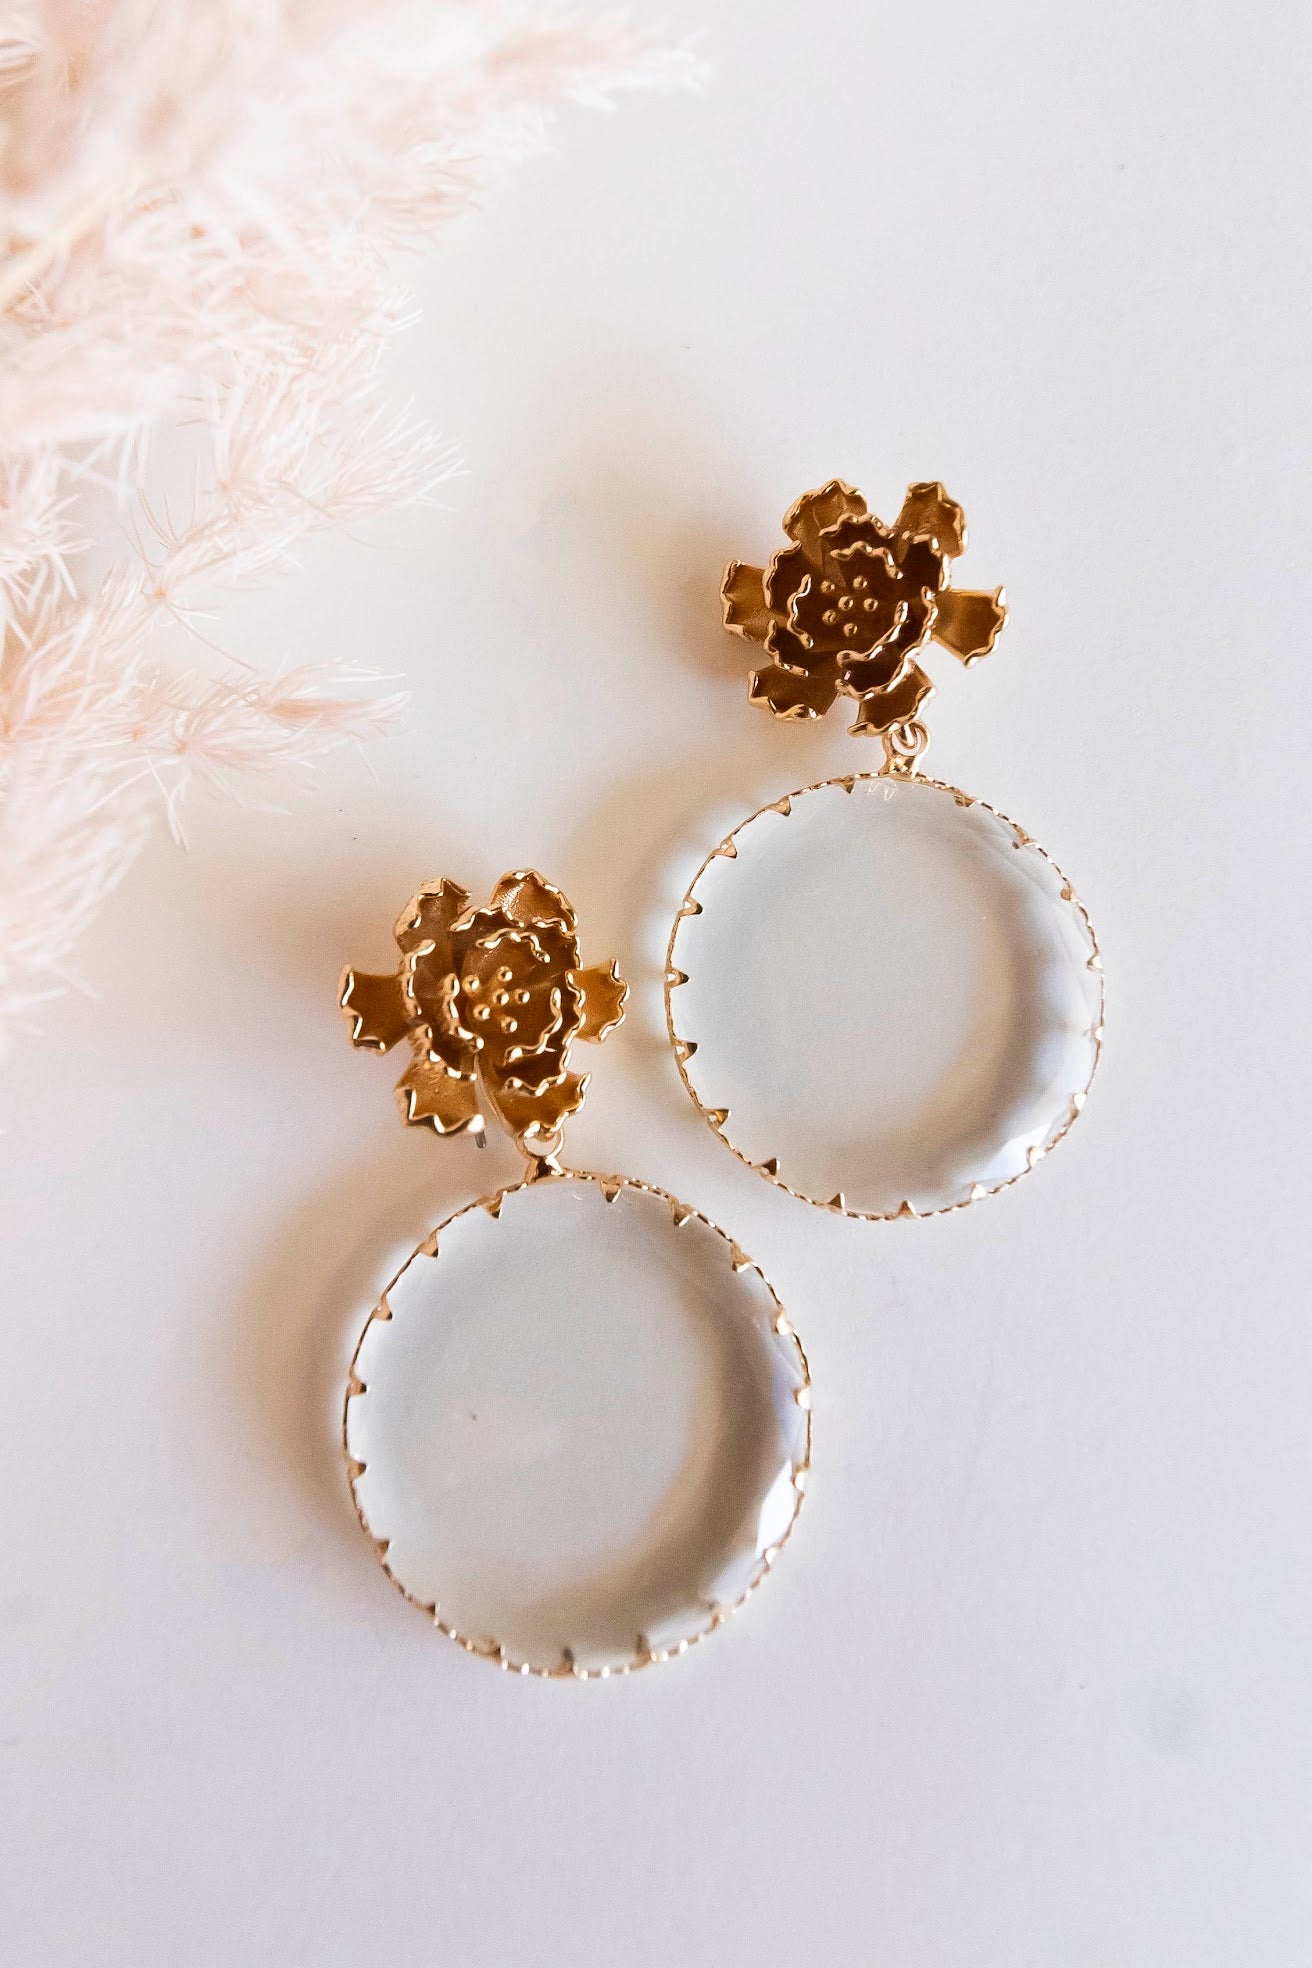 Load image into Gallery viewer, Aubrey Floral Drop Earrings | Clear Round Crystal with Gold Metal Floral Detail | Special Occasion Accessories
